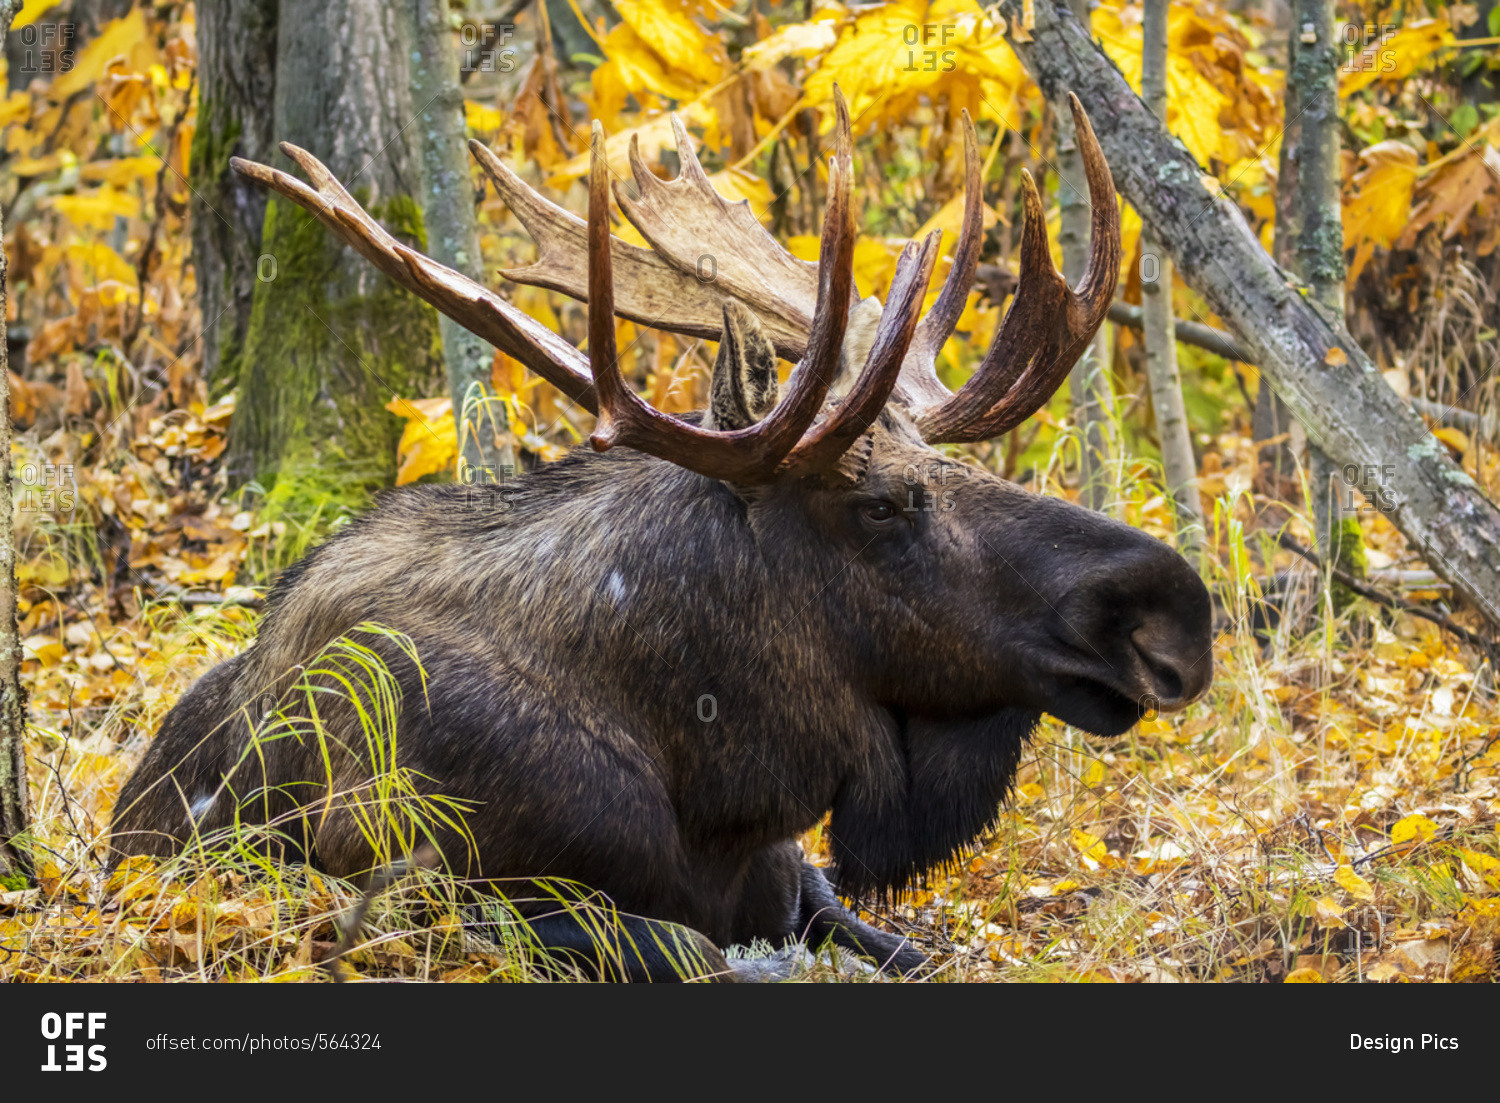 Bull moose (alces alces) with antlers in autumn, South-central Alaska, Anchorage, Alaska, United States of America